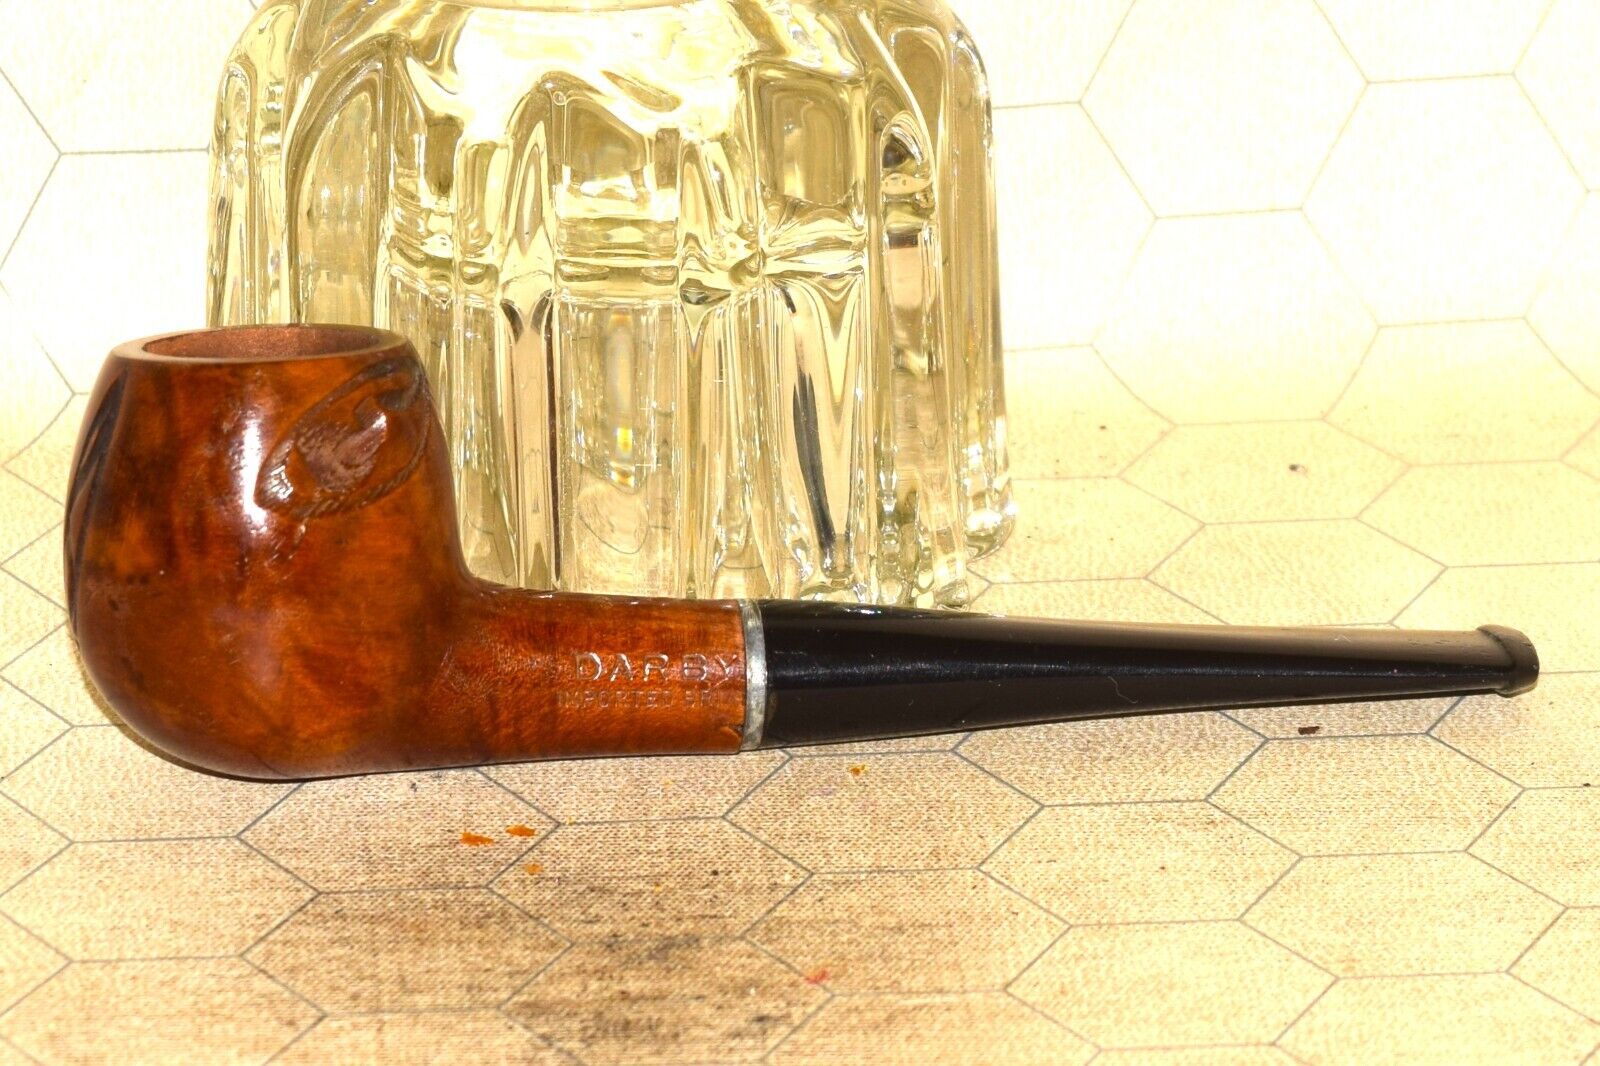 DARBY IMPORTED BRIAR Tobacco Pipe #A991